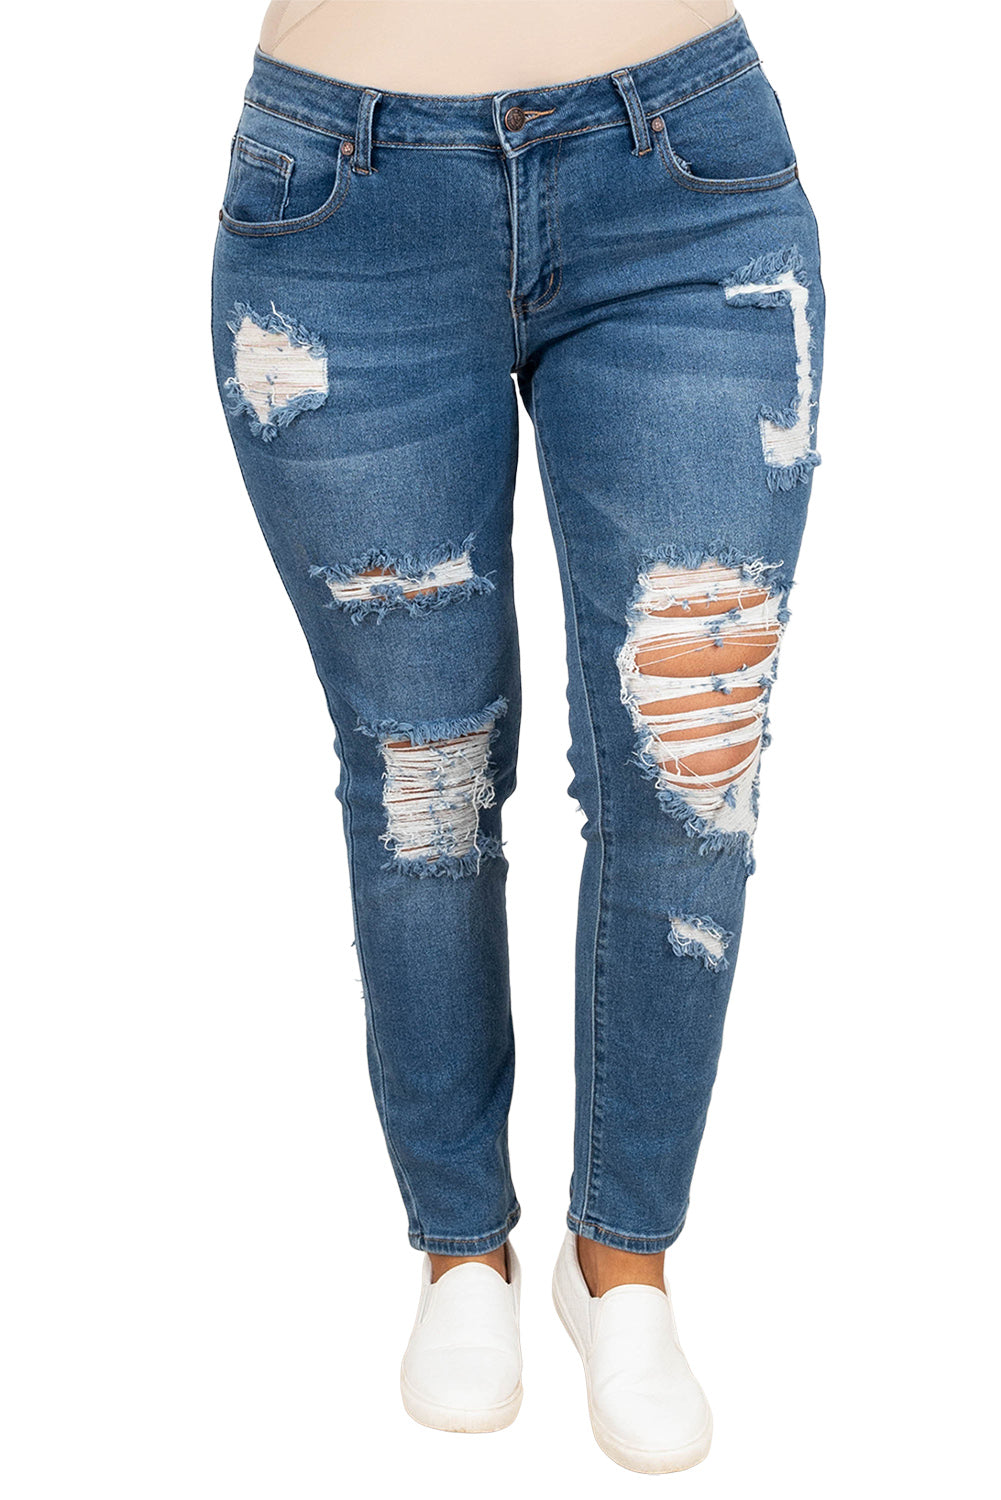 Blue Plus Size Distressed Ripped Skinny Jeans